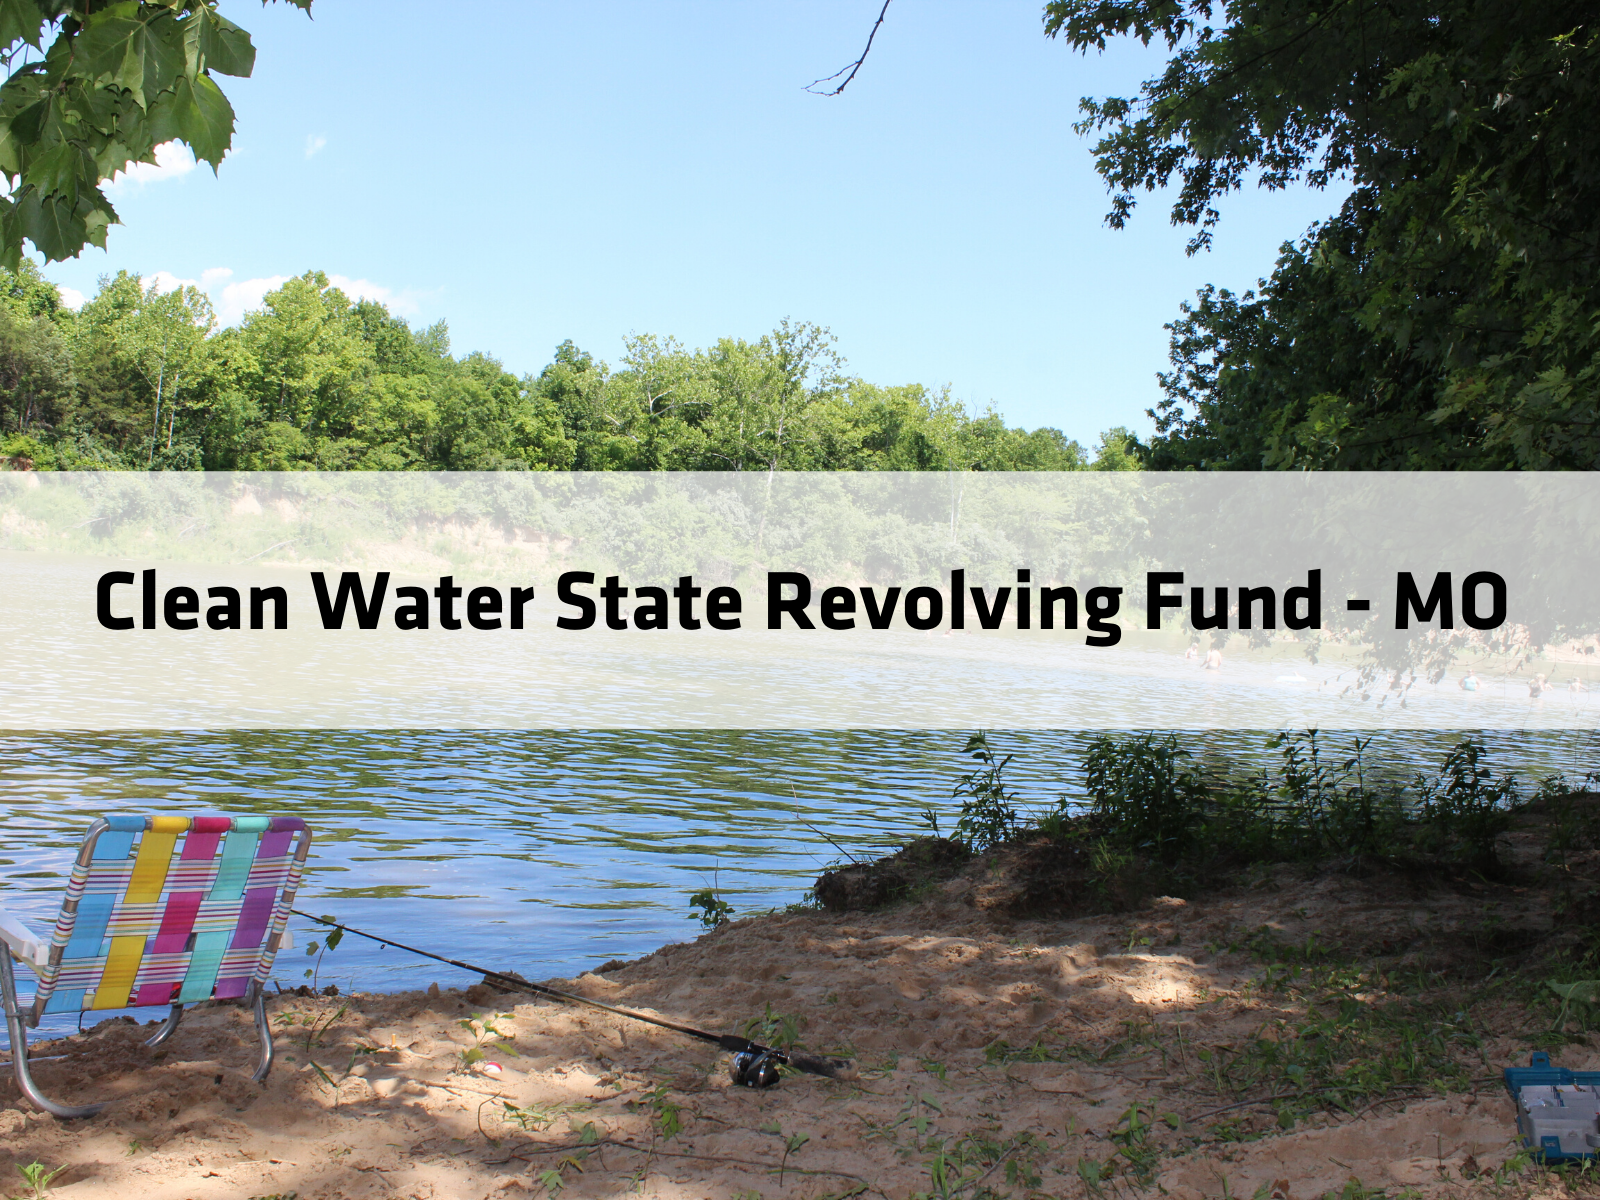 Clean Water State Revolving Fund - MO